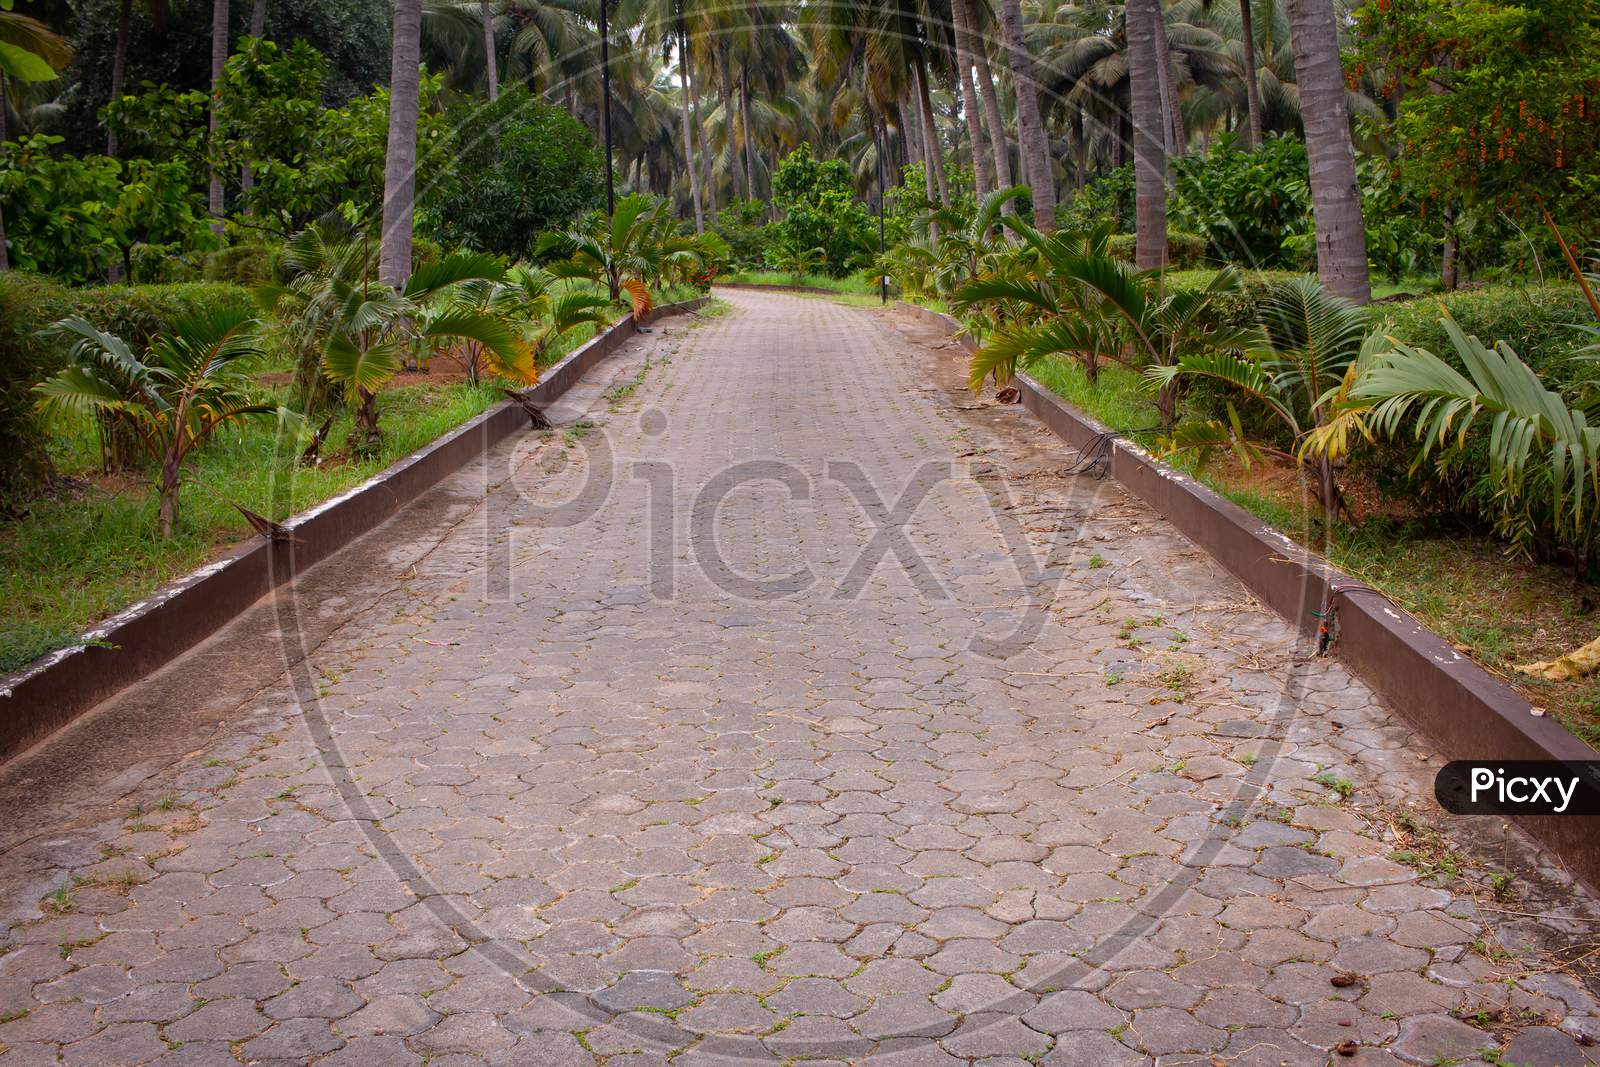 A Beautiful Path And Driveway Along The Coconut Tree Plantation.